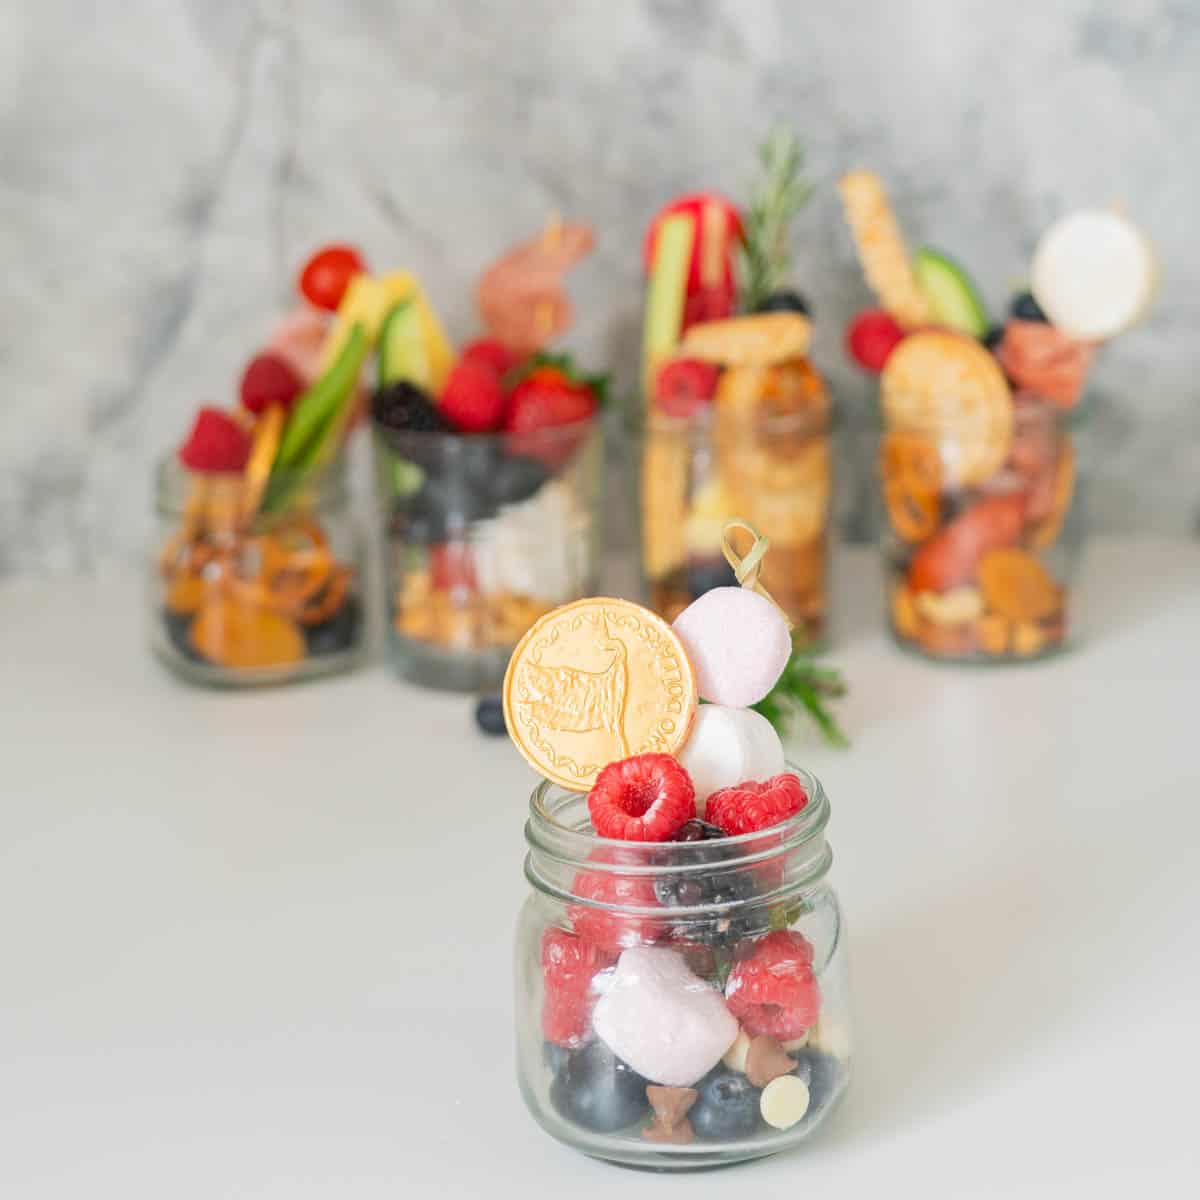 A small jar filled with berries, marshmallows and chocolate coins.